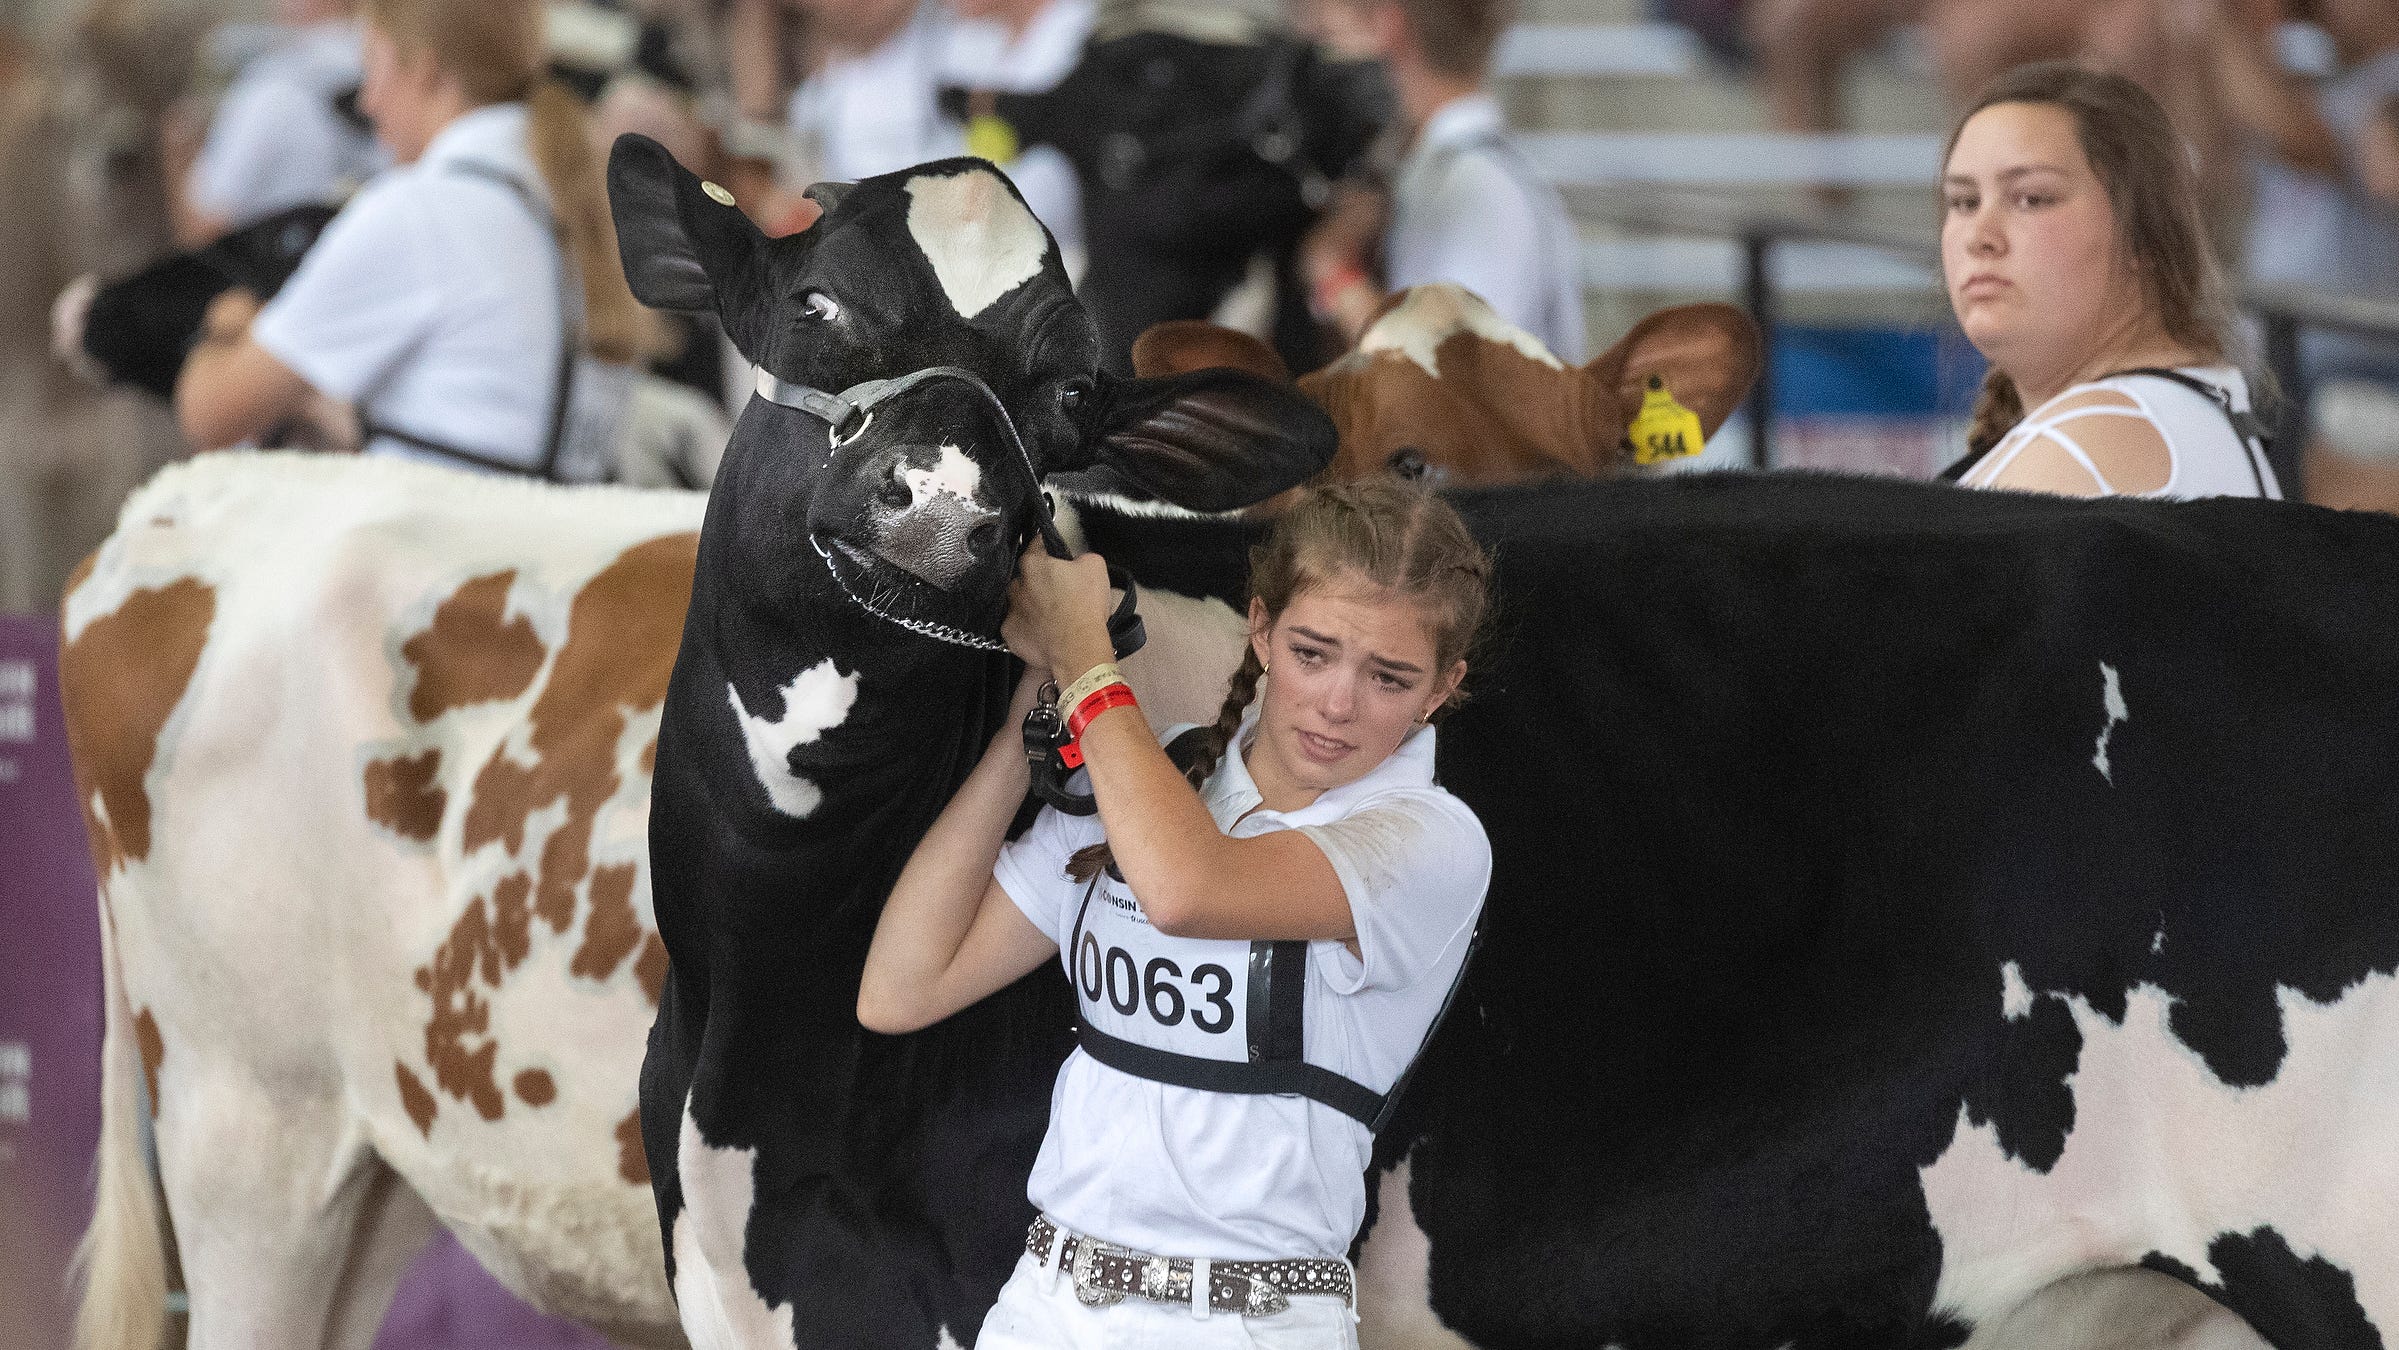 Wisconsin State Fair 2022: Hours, tickets, deals, carry-in policy